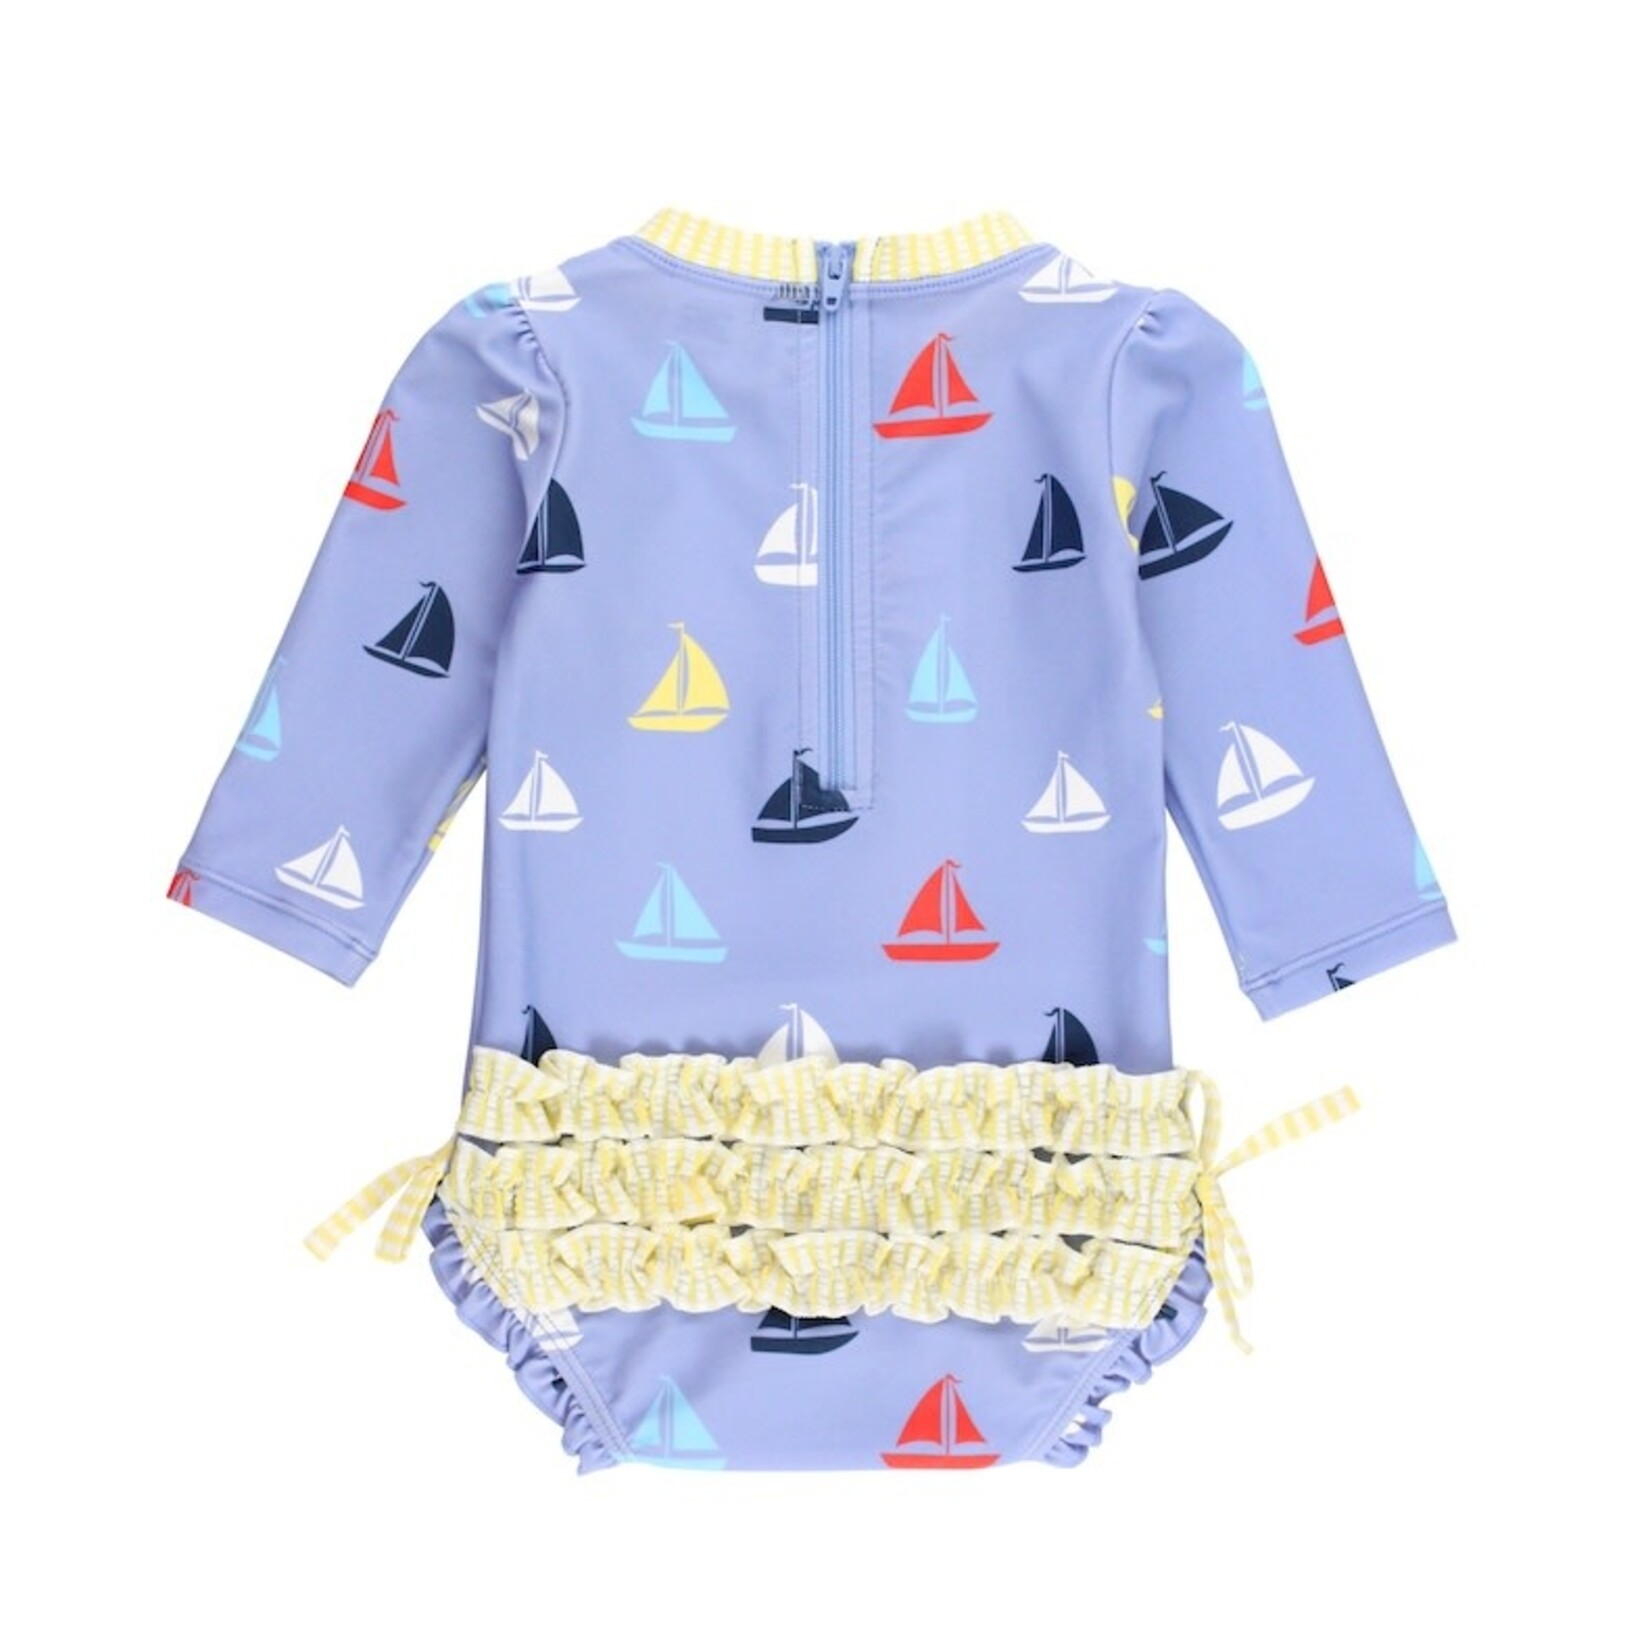 RUFFLE BUTTS Down by the Bay Long-Sleeve Rash Guard Suit